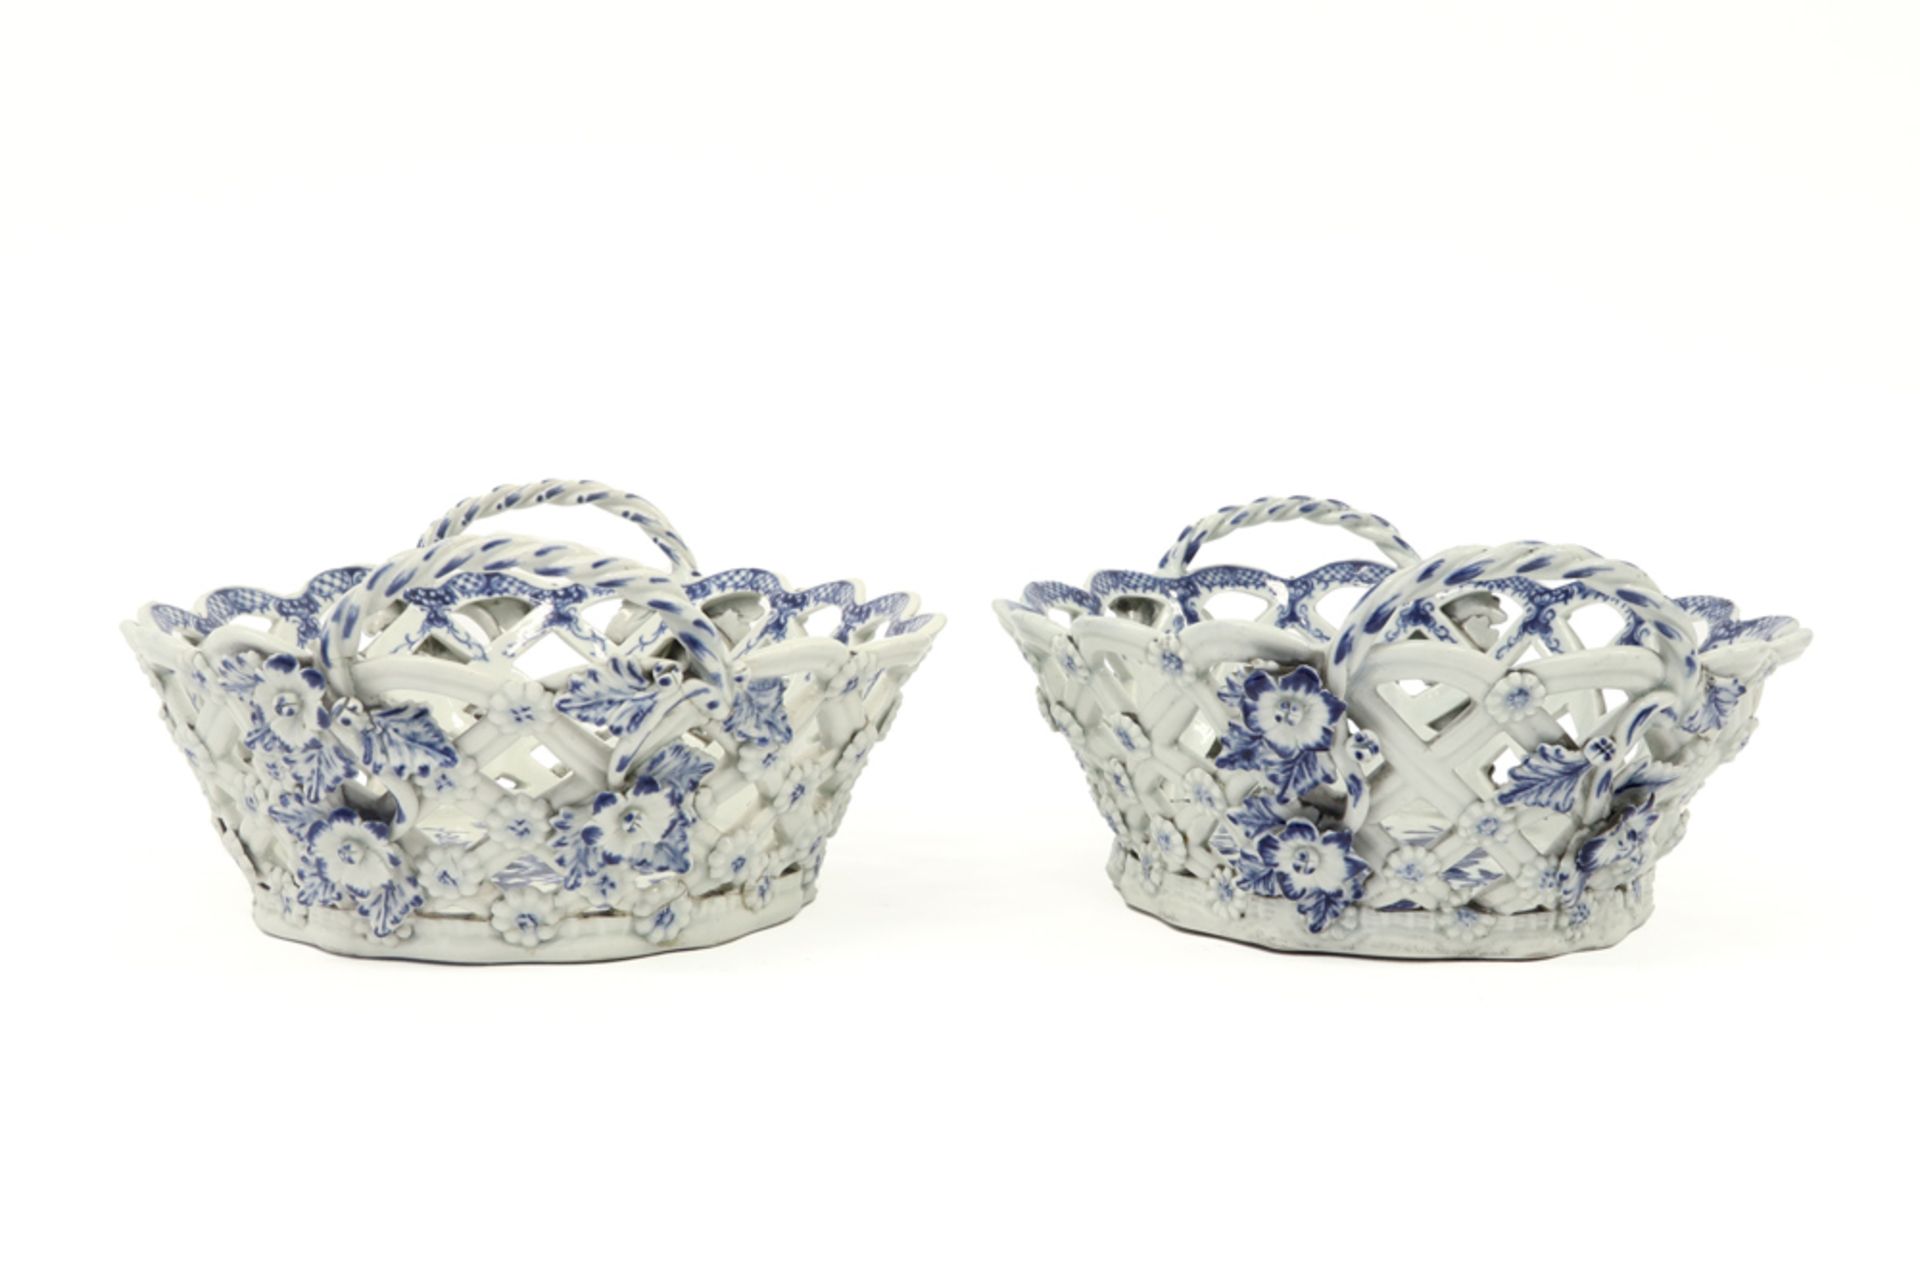 pair of 18th Cent. English Worcester marked baskets in open work ceramic with a blue-white flower - Image 3 of 5